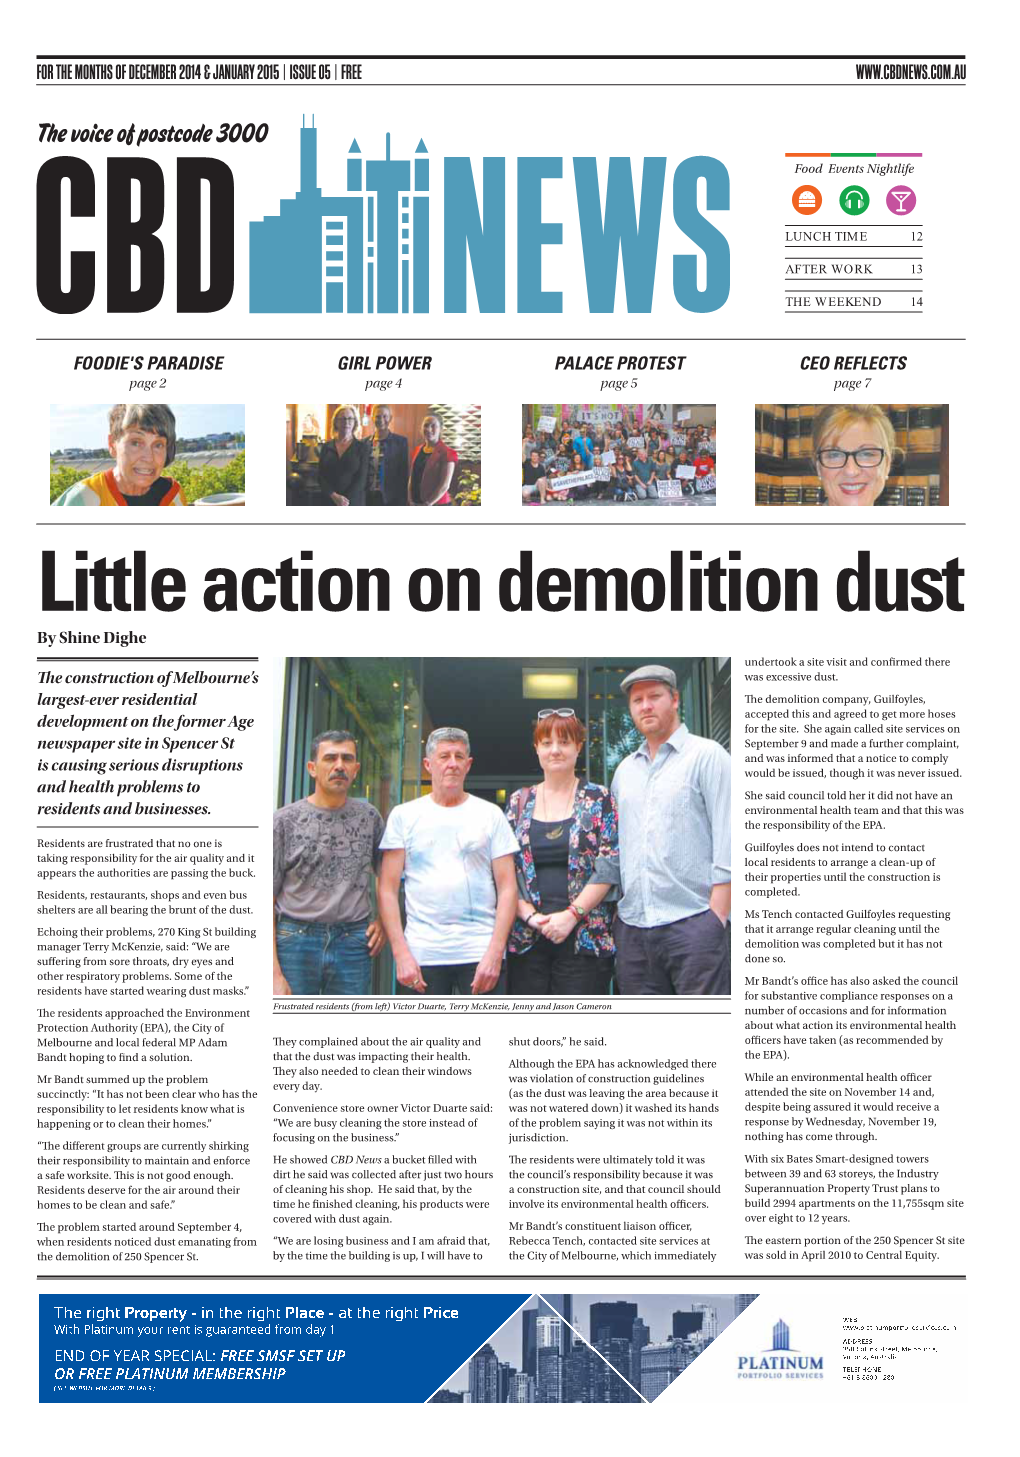 Little Action on Demolition Dust by Shine Dighe Undertook a Site Visit and Confi Rmed There Th E Construction of Melbourne’S Was Excessive Dust